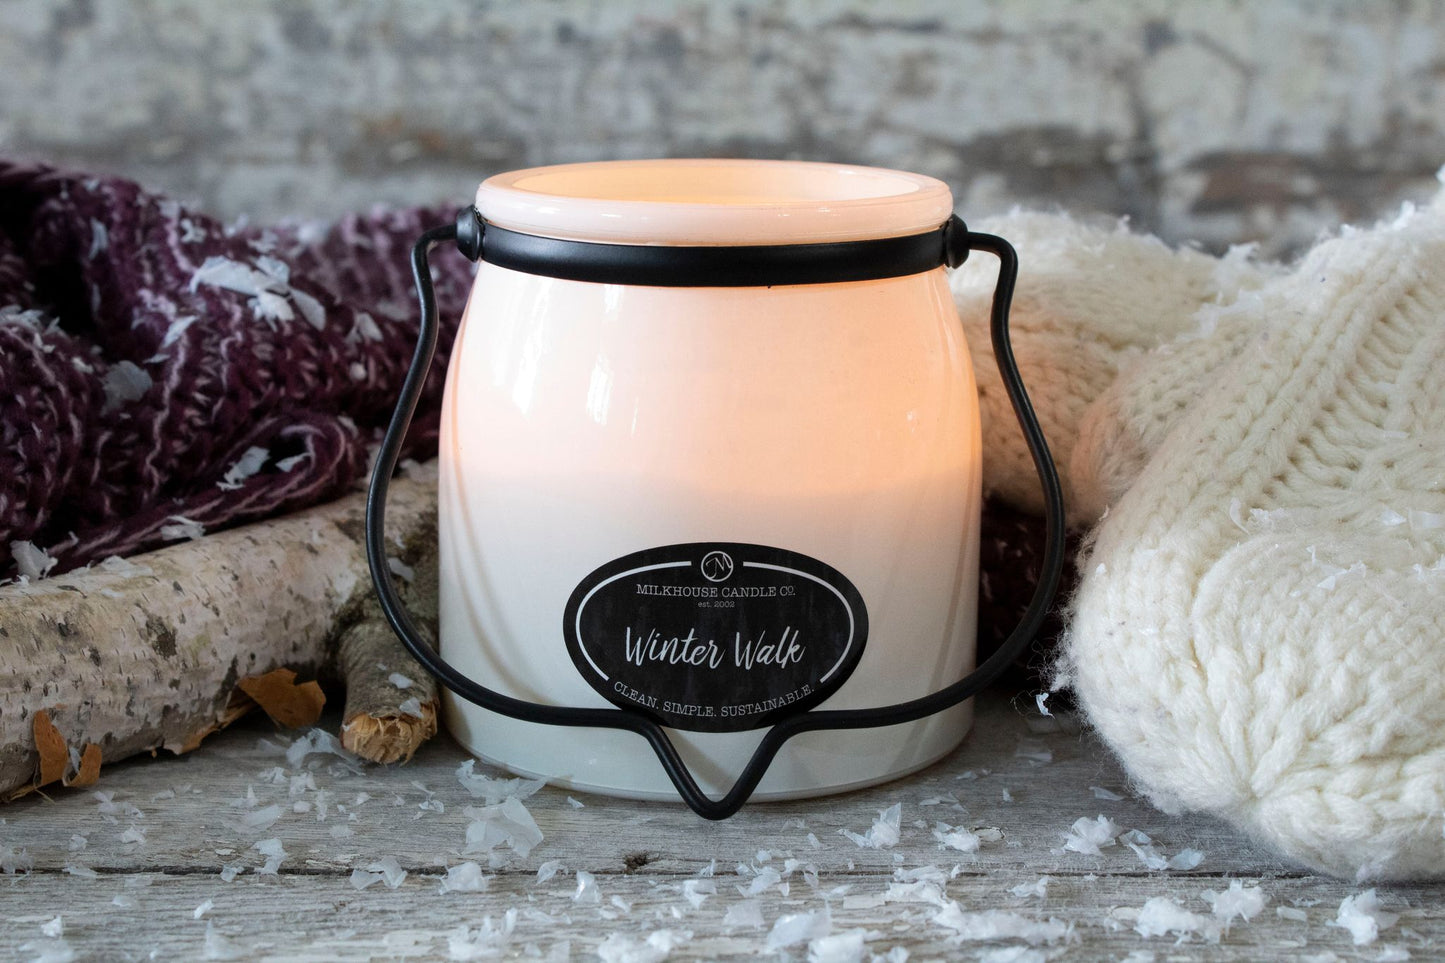 Milkhouse Candle Co. Winter Walk